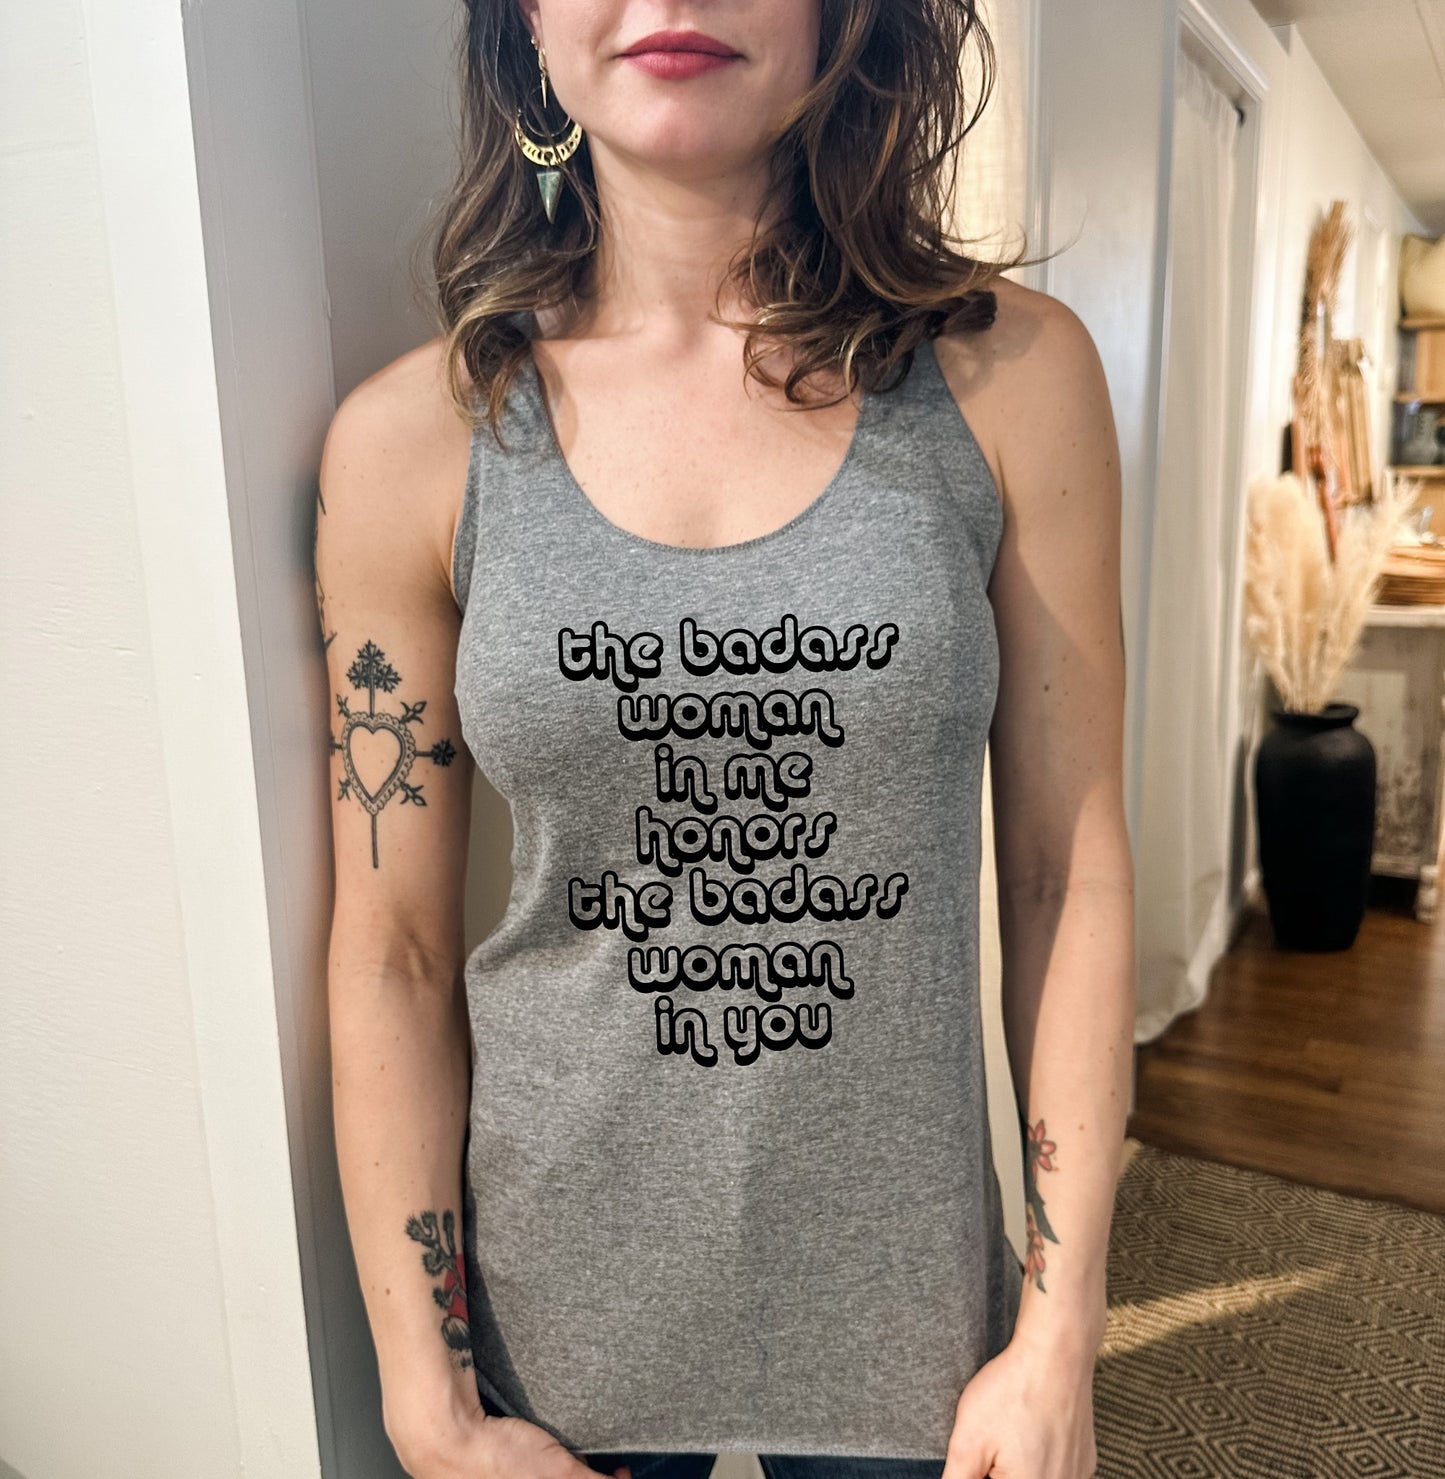 The Badass Woman in Me Honors the Badass Woman in You - Women's Tank - Heather Gray, Tahiti, or Envy